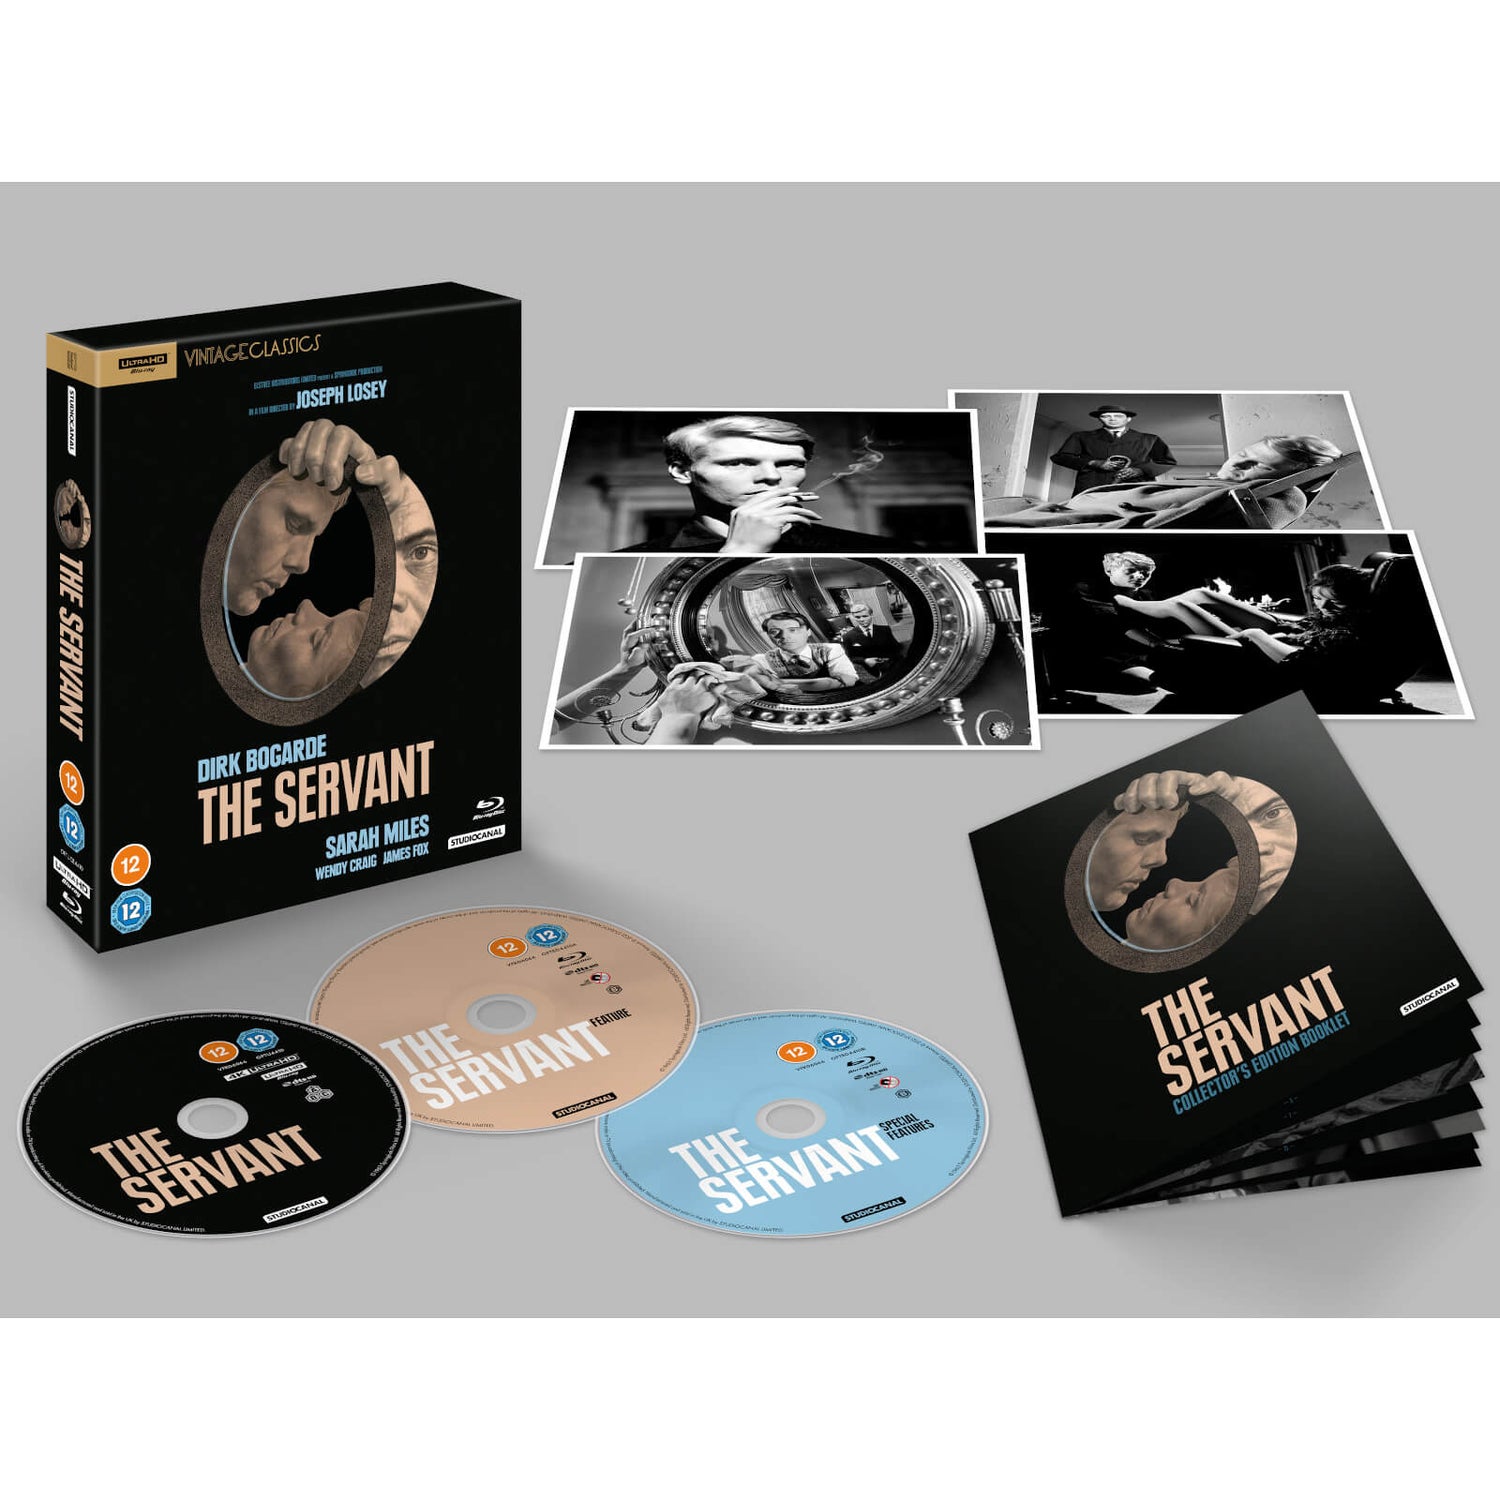 The Servant (Vintage Classics) - 4K Ultra HD Collector's Edition